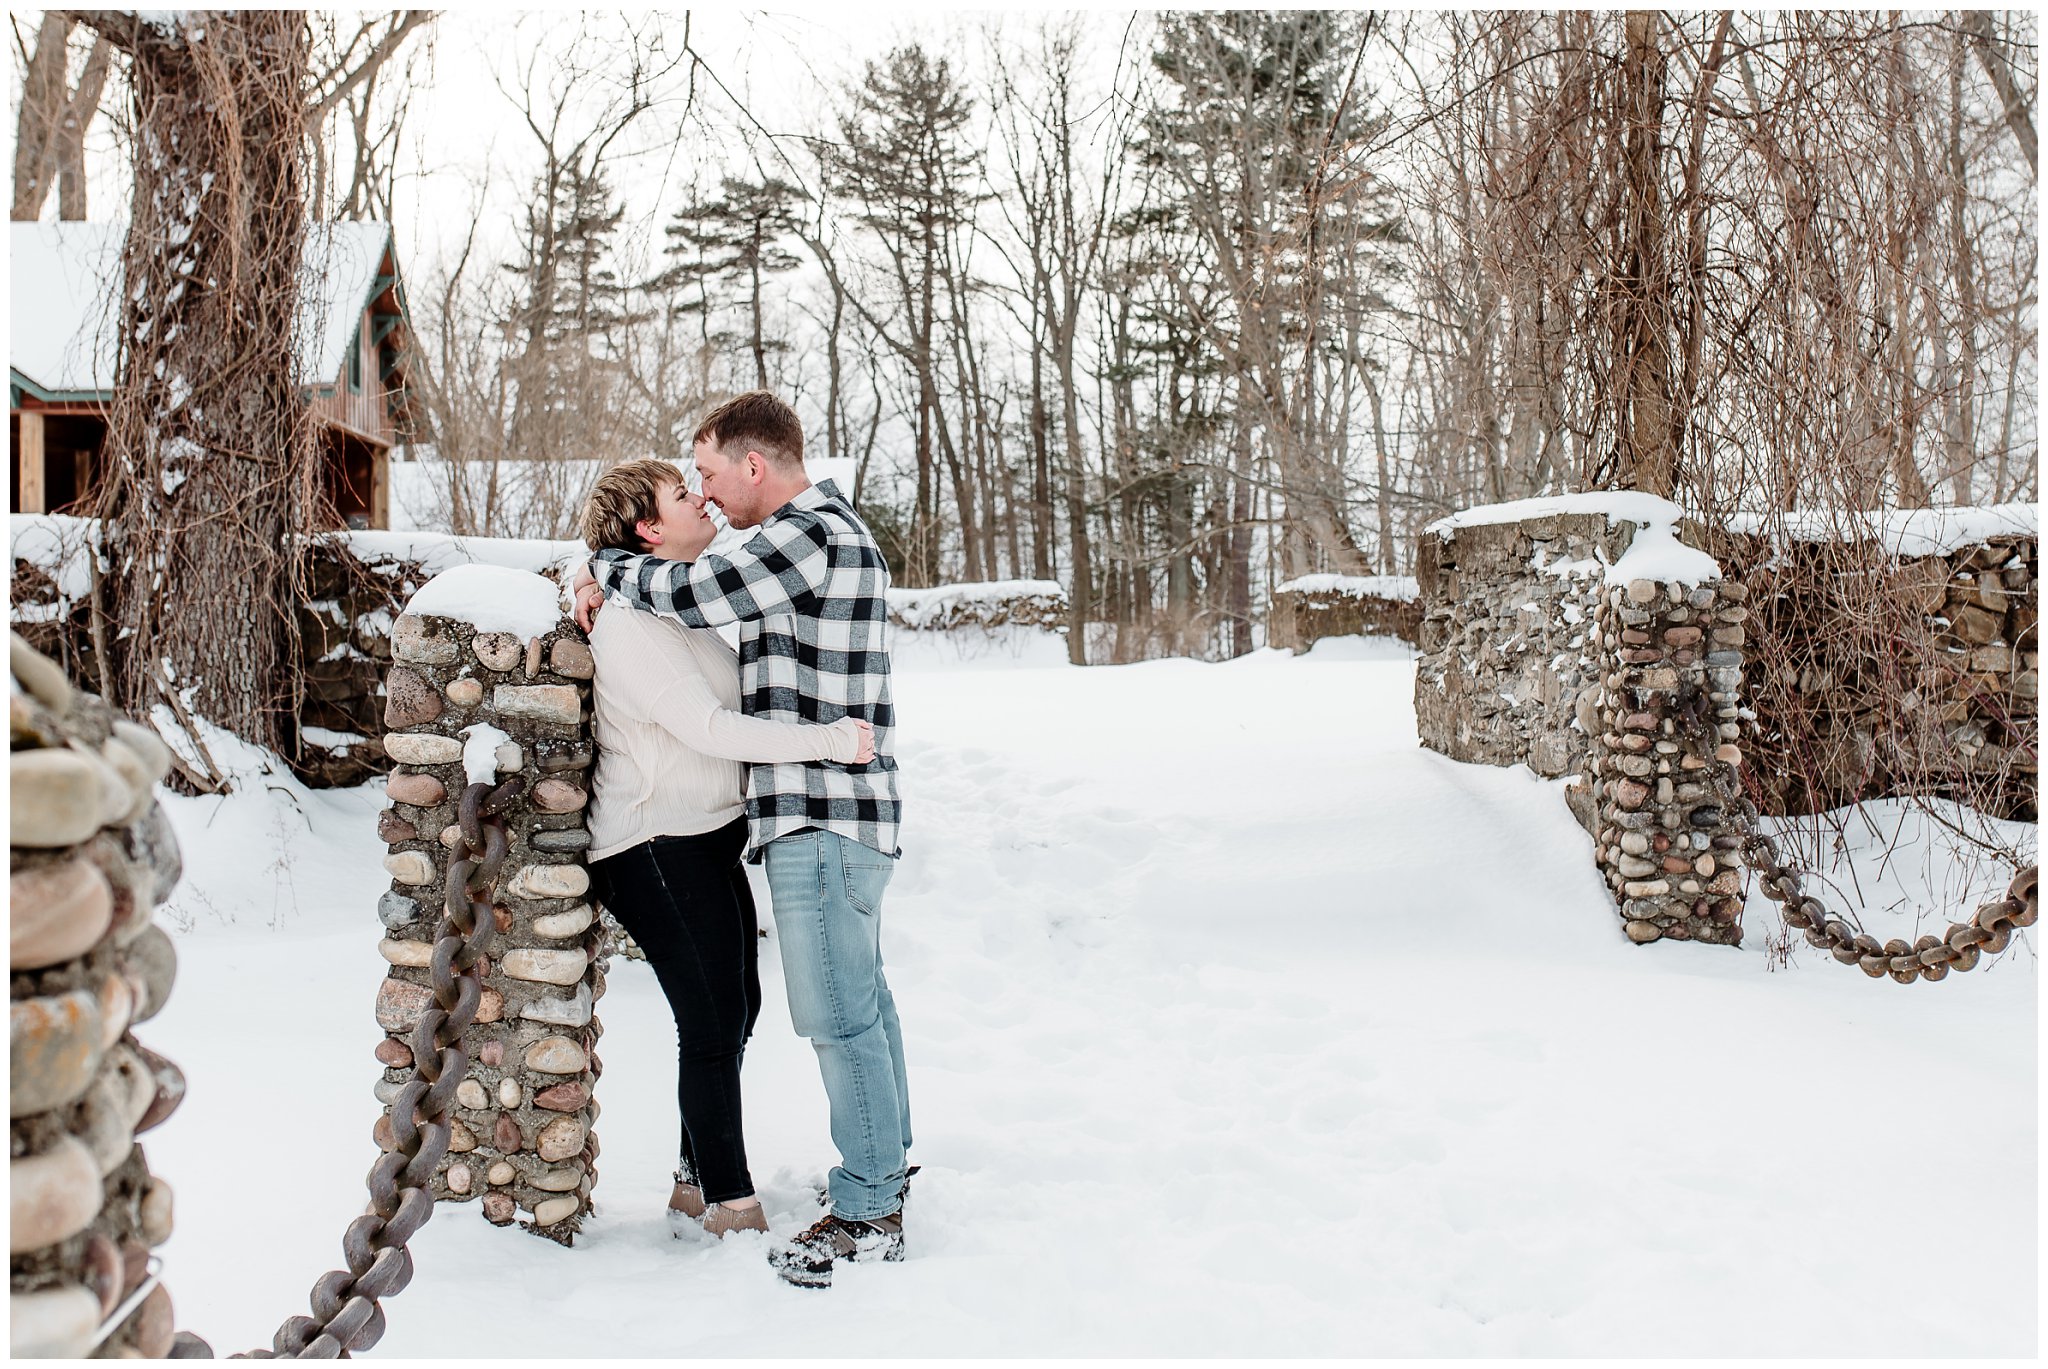 Engaagement Photographer,Engagement Session,Joanna Young Photography,Lake Ontario Engagement Session,Oswego Engaegment Session,Oswego Photographer,Syracuse Photographer,Syracuse Wedding Photographer,Winter Engagement Ideas,Winter Engagement Session,